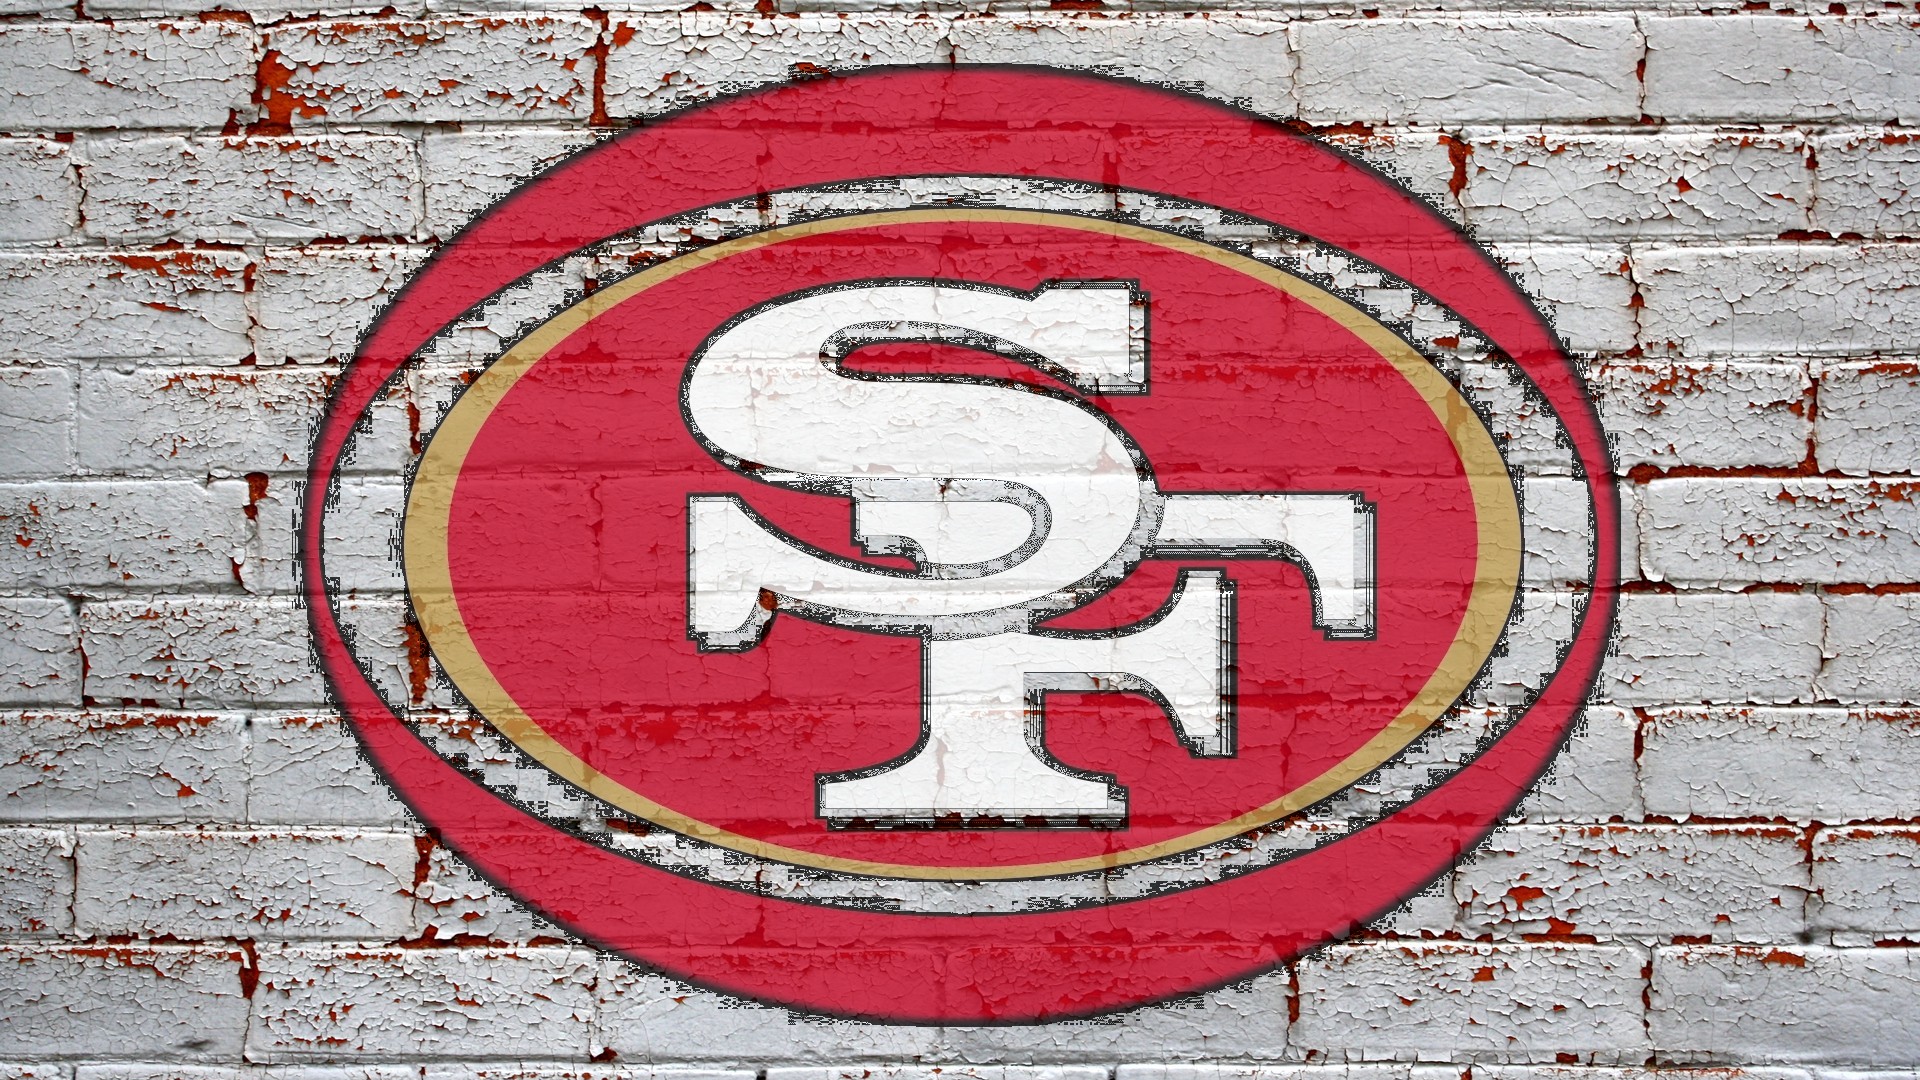 More San Francisco 49ers wallpapers San Francisco 49ers wallpapers 1920x1080